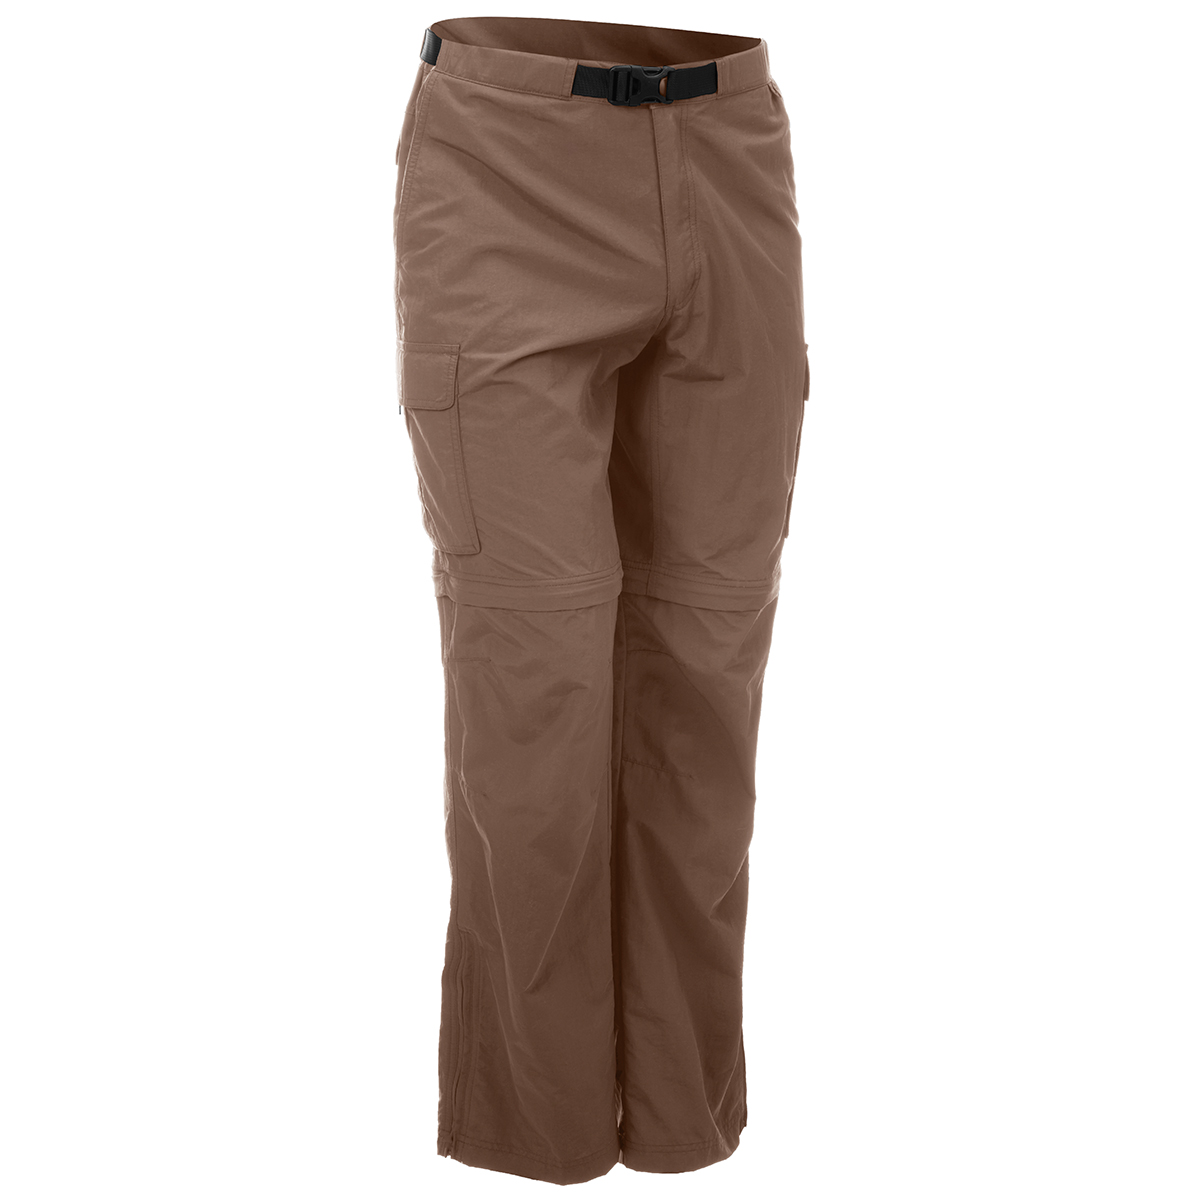 Eastern Mountain Sports Casual Convertible Pants for Women